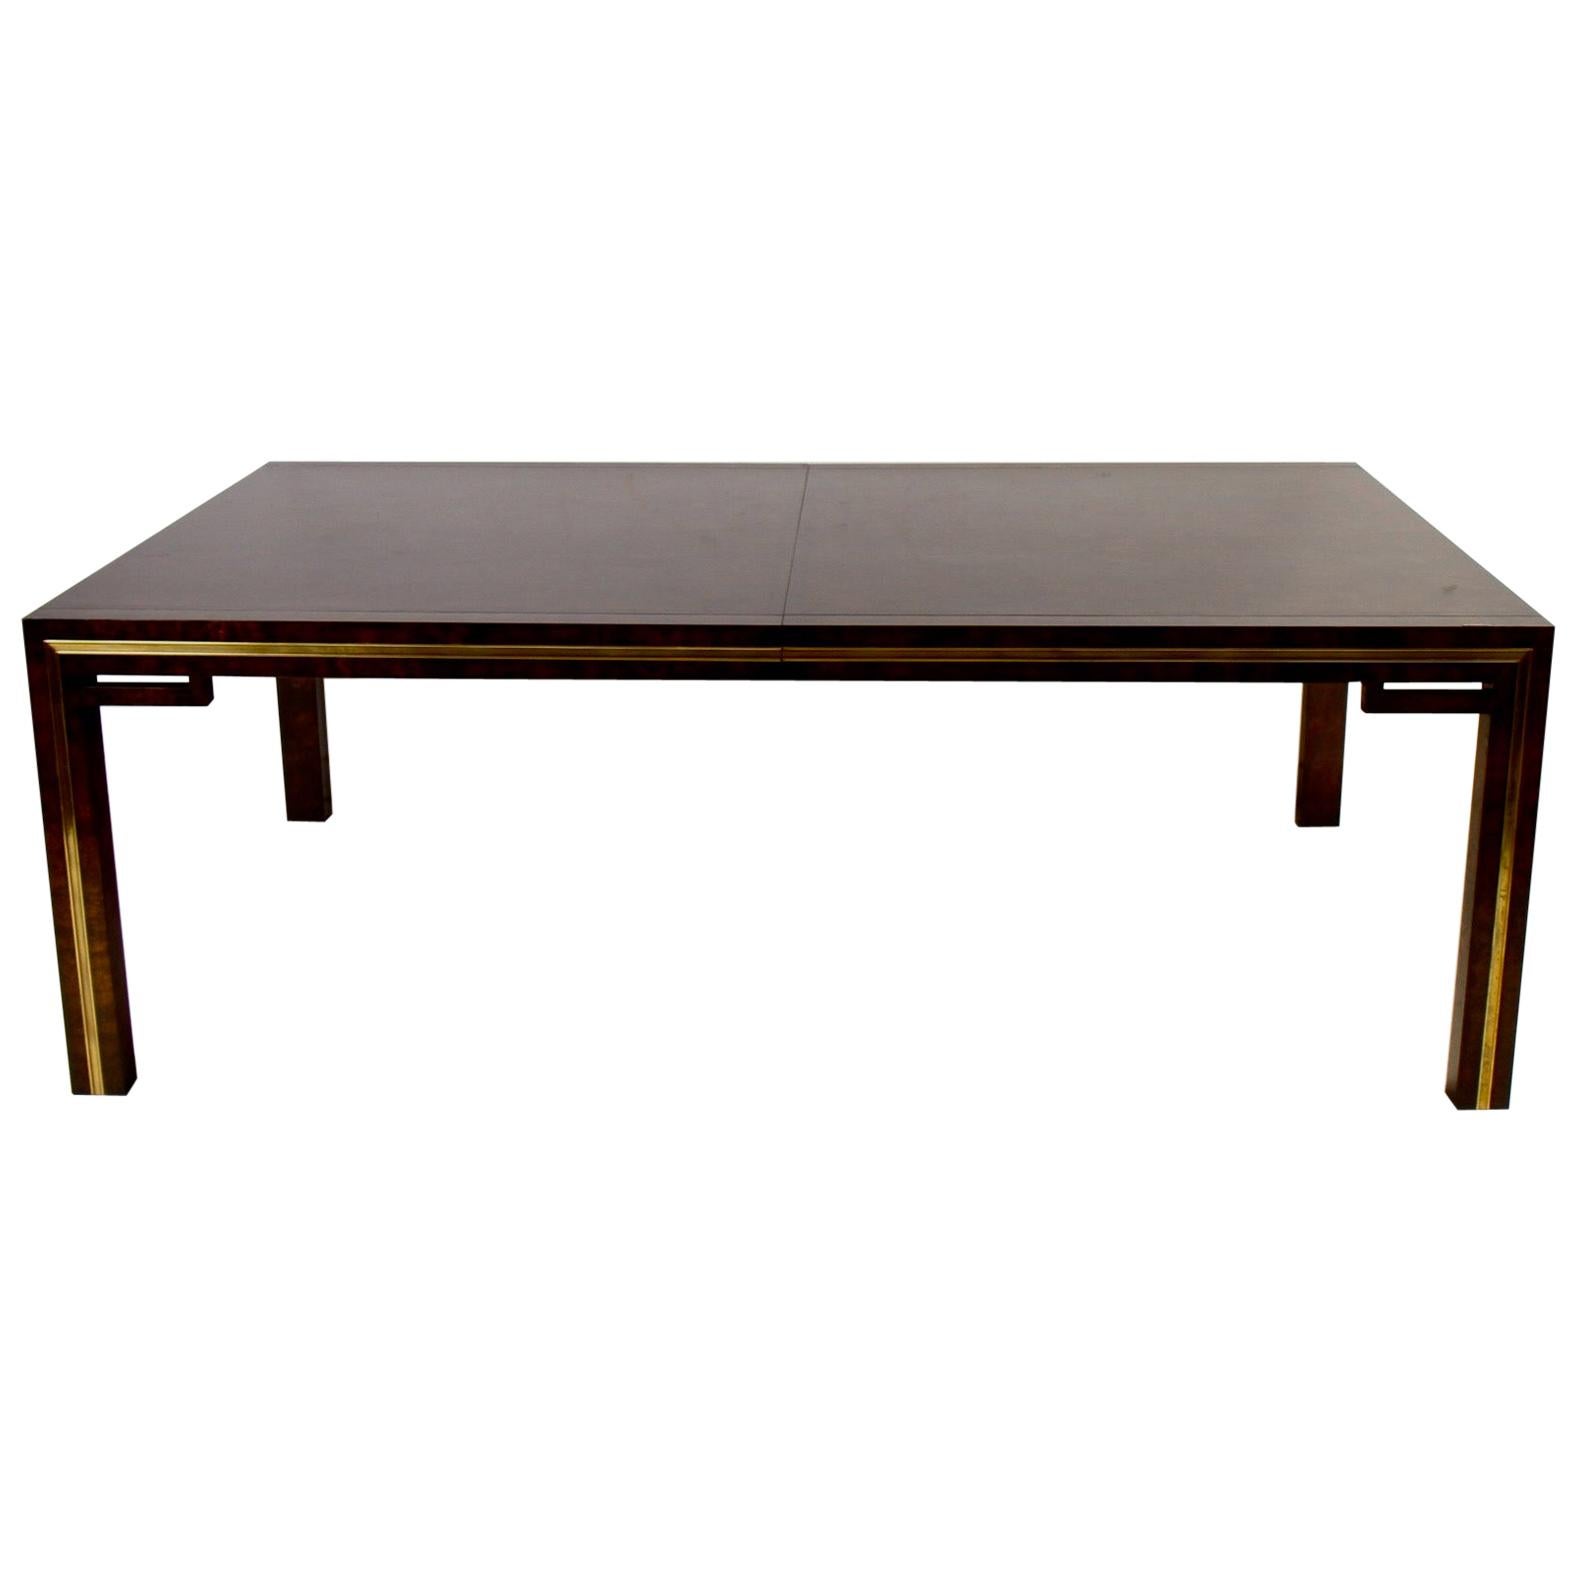 Bernhard Rohne for Mastercraft Amboyna Burl and Brass Extension Dining Table